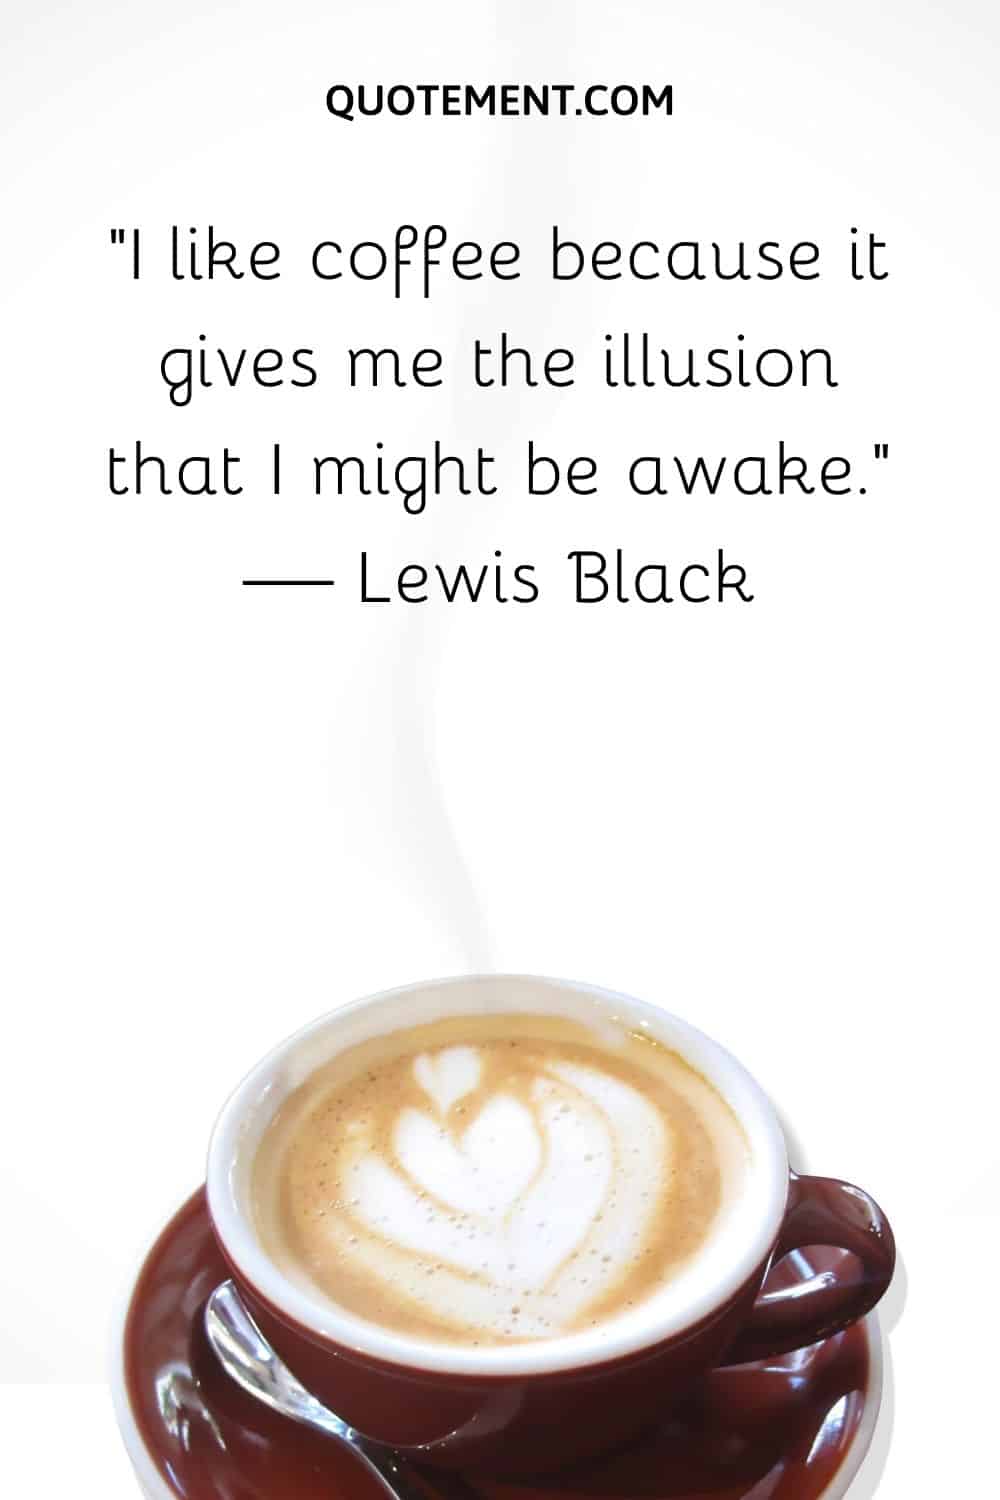 I like coffee because it gives me the illusion that I might be awake